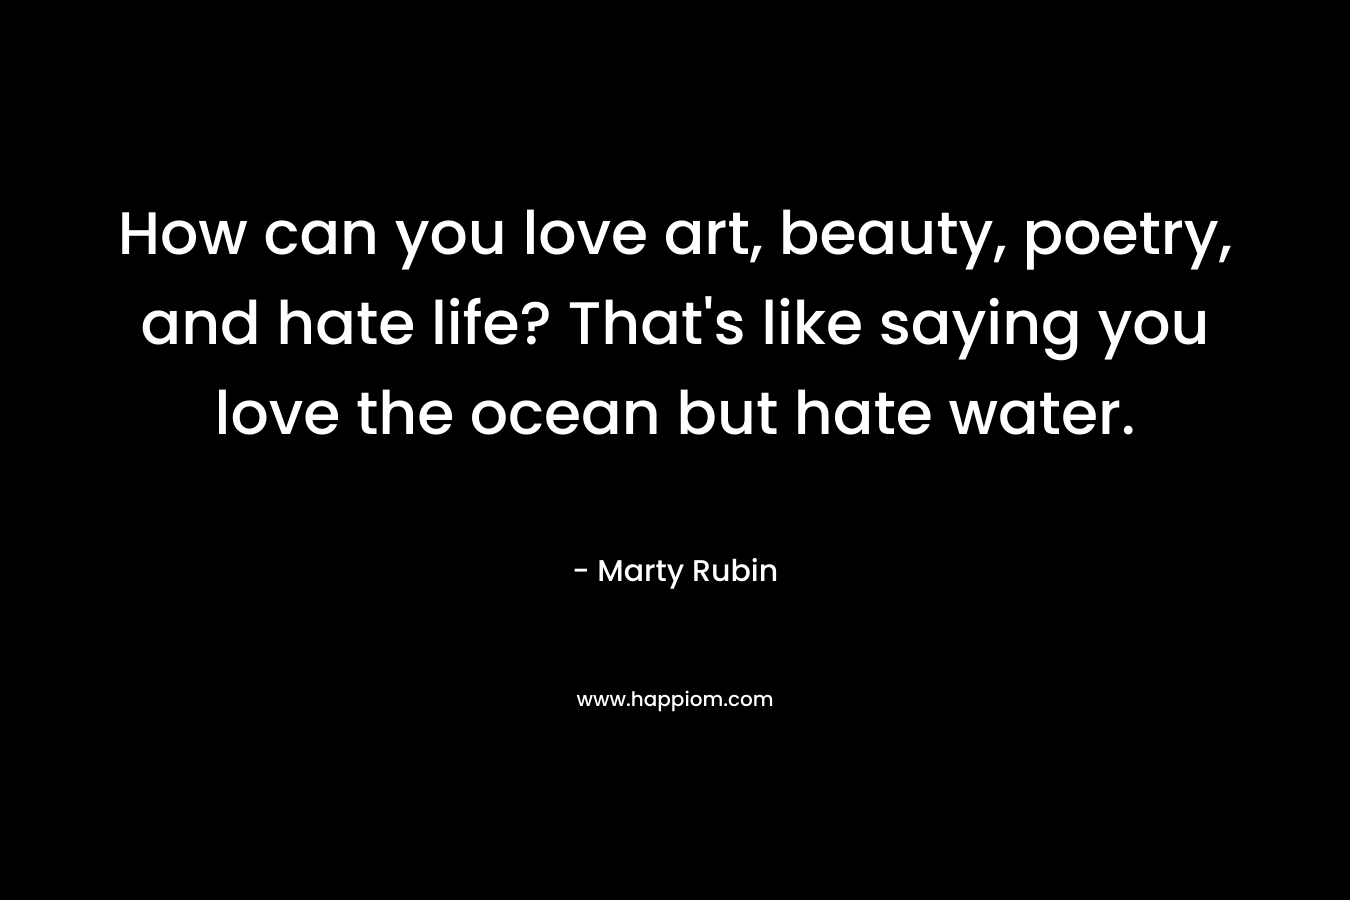 How can you love art, beauty, poetry, and hate life? That's like saying you love the ocean but hate water.